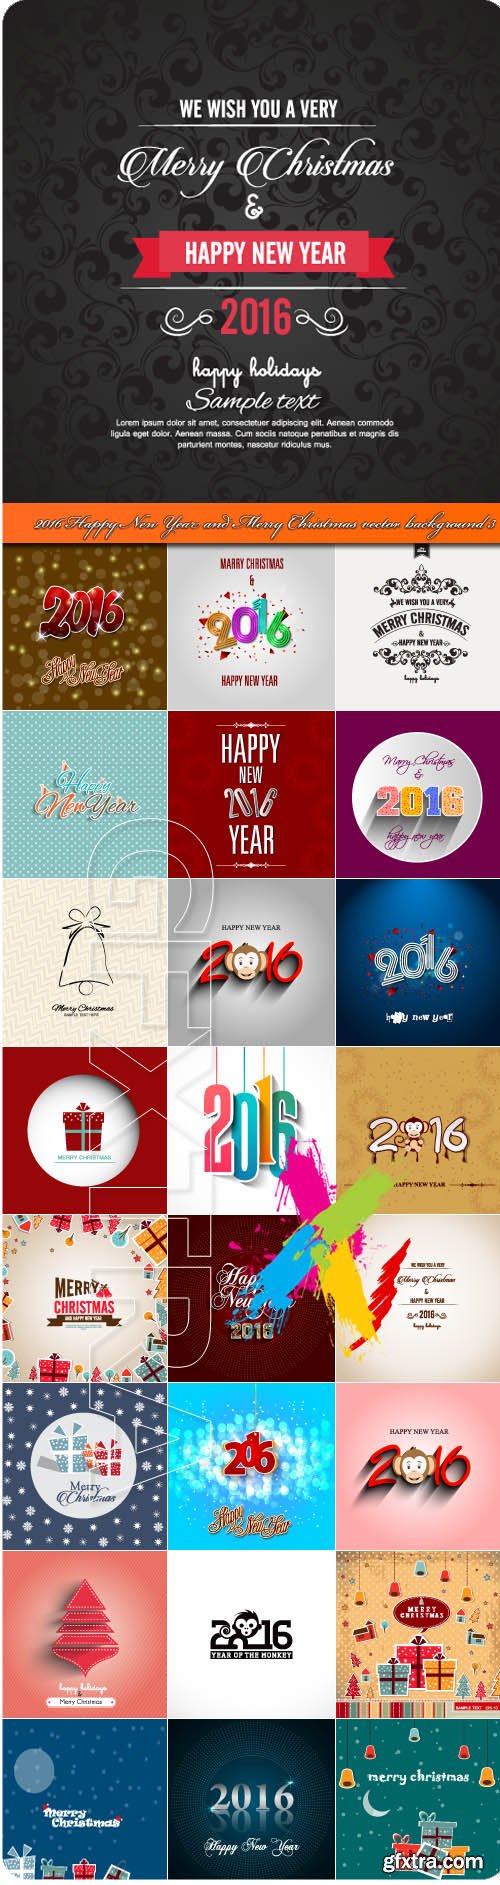 2016 Happy New Year and Merry Christmas vector background 3